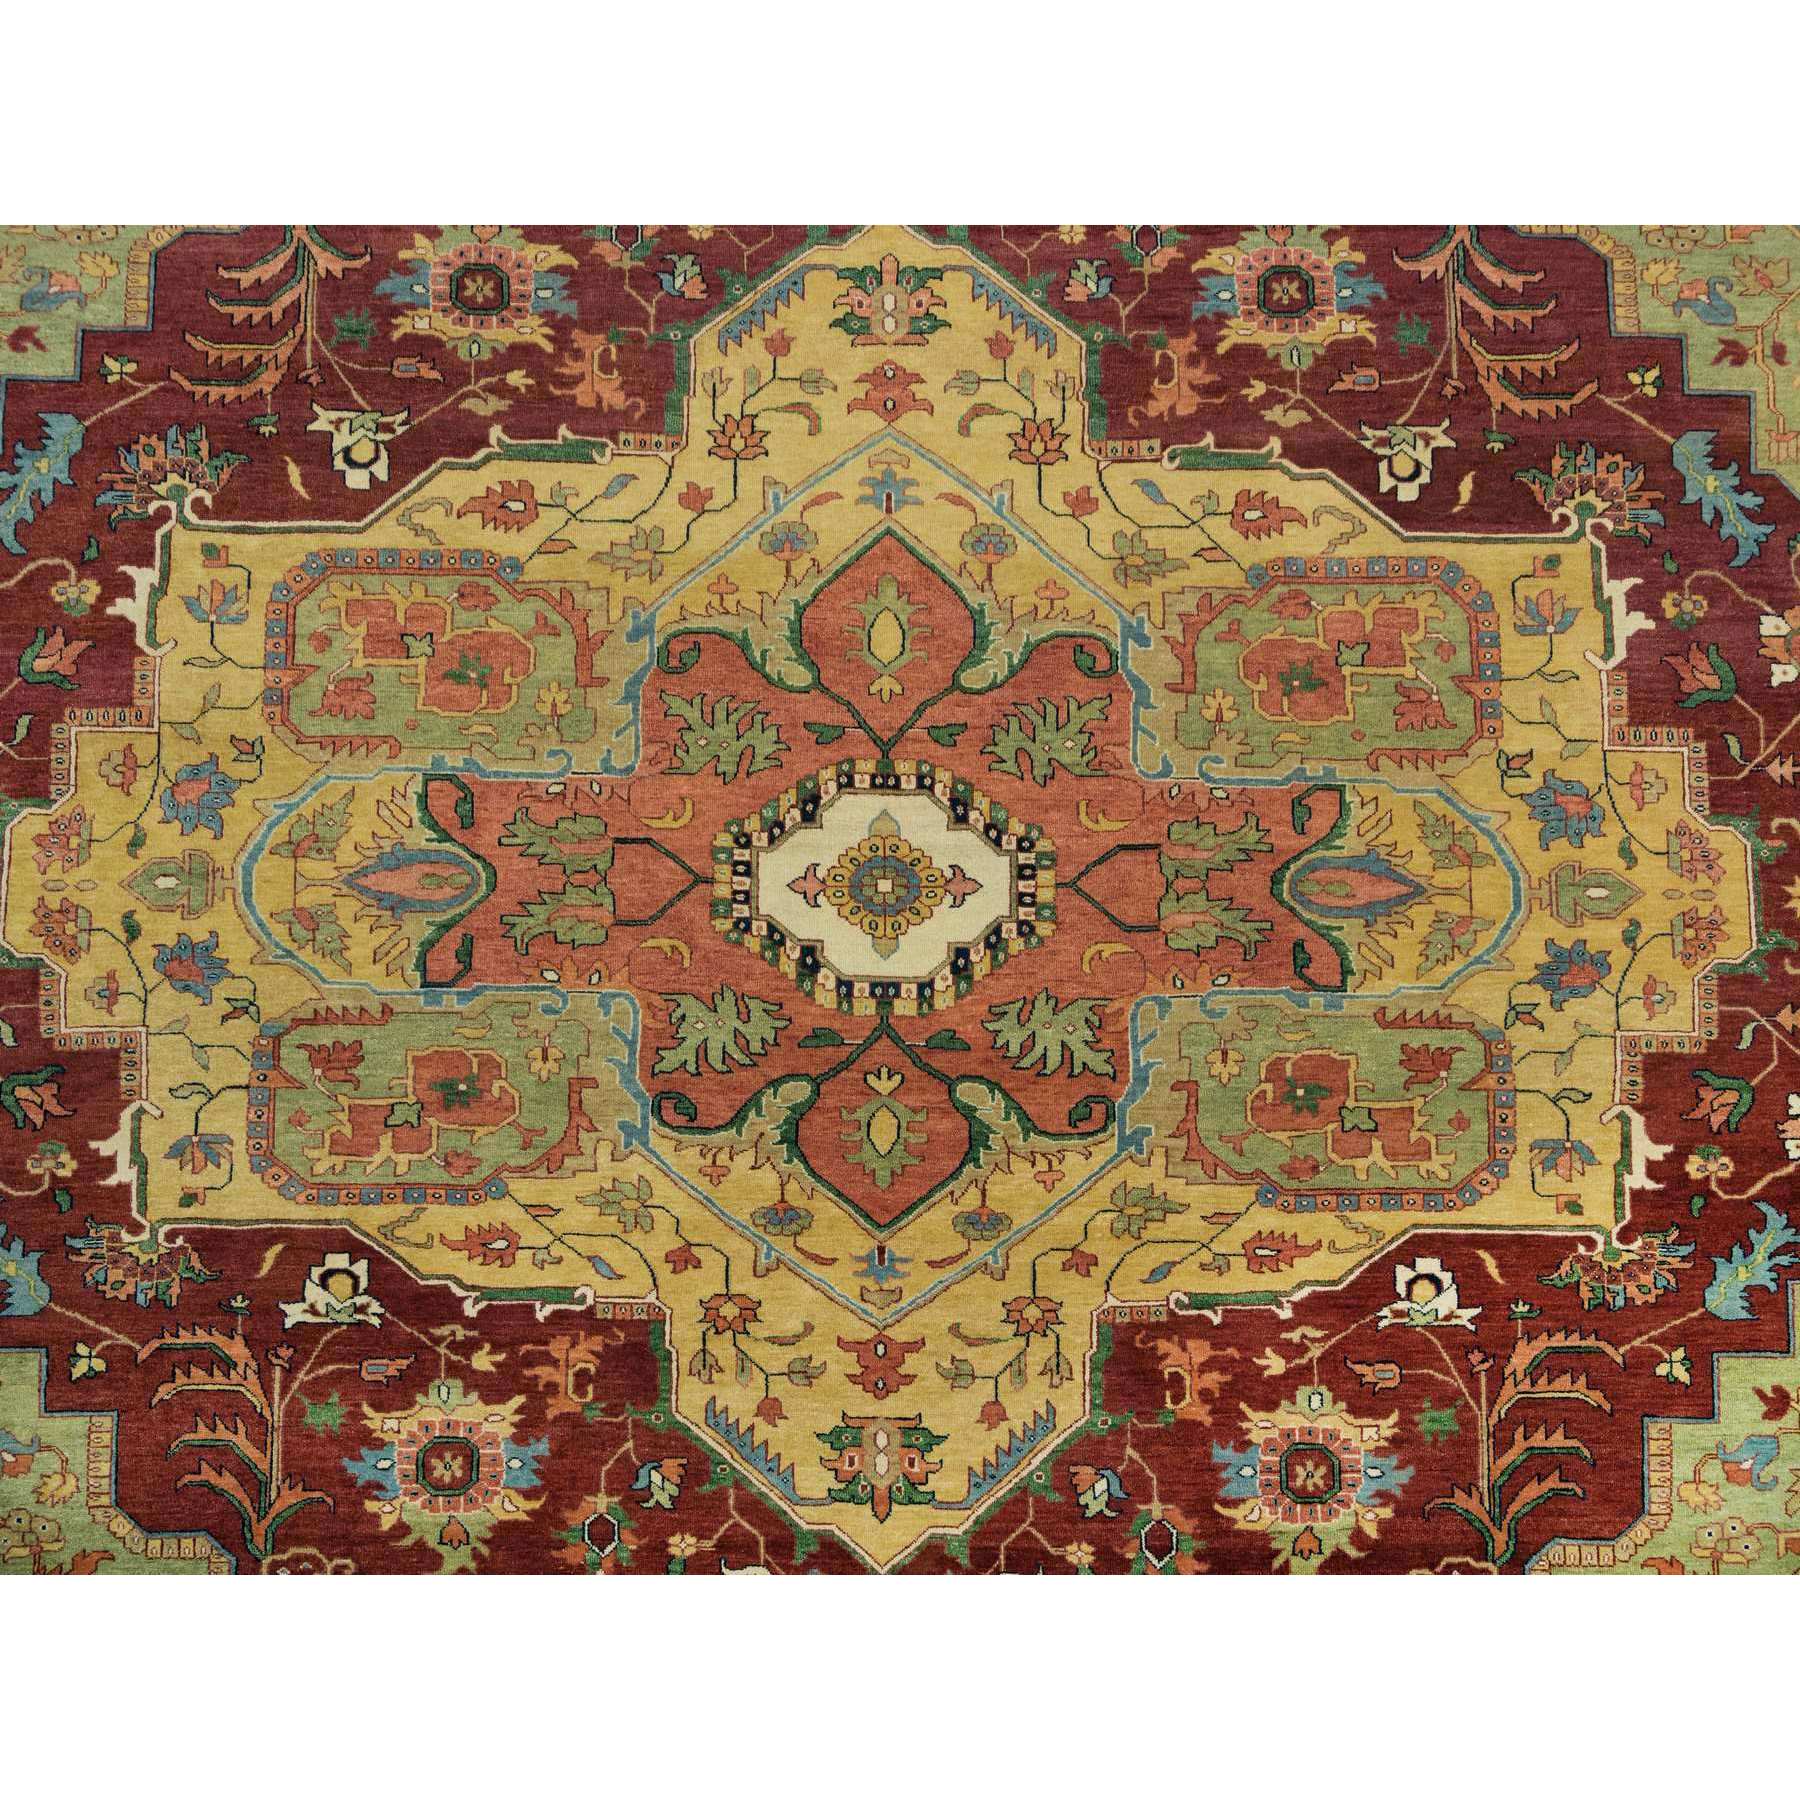 12'x15'3" Terracotta Red, Antiqued Fine Heriz Re-Creation, Densely Woven, Natural Dyes, Organic Wool, Hand Woven, Oversize Oriental Rug 